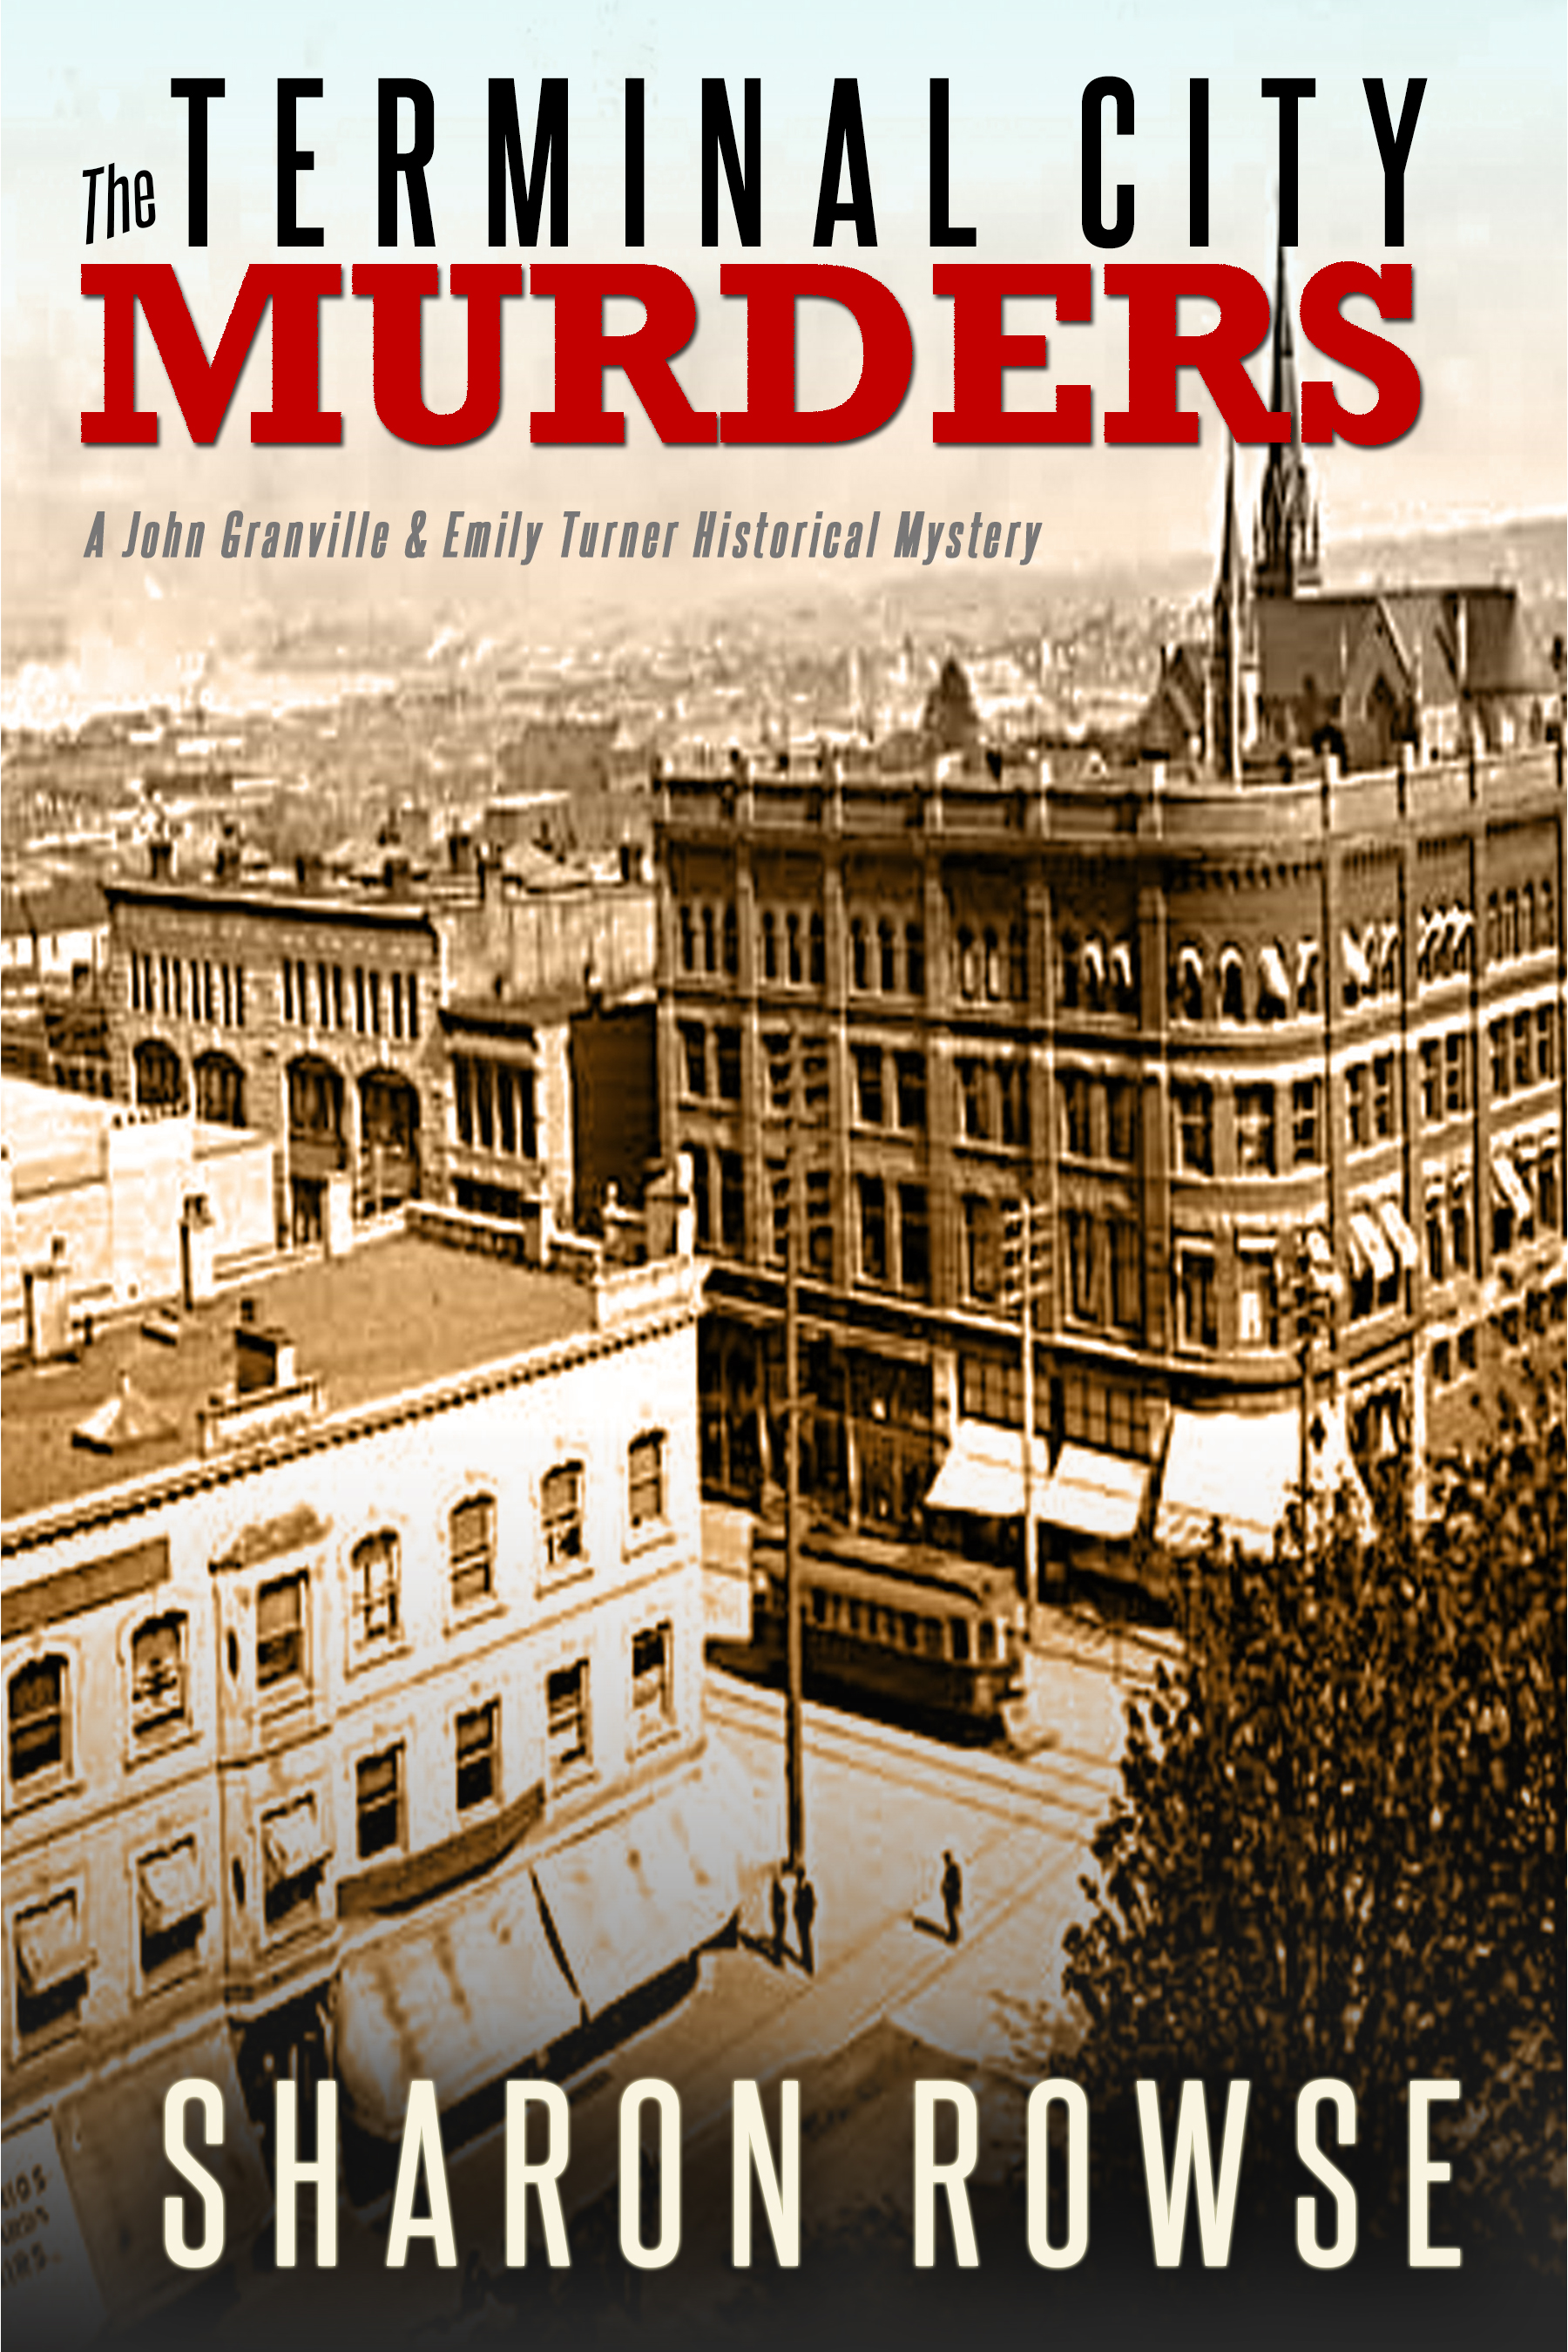 The Terminal City Murders — SHARON ROWSE